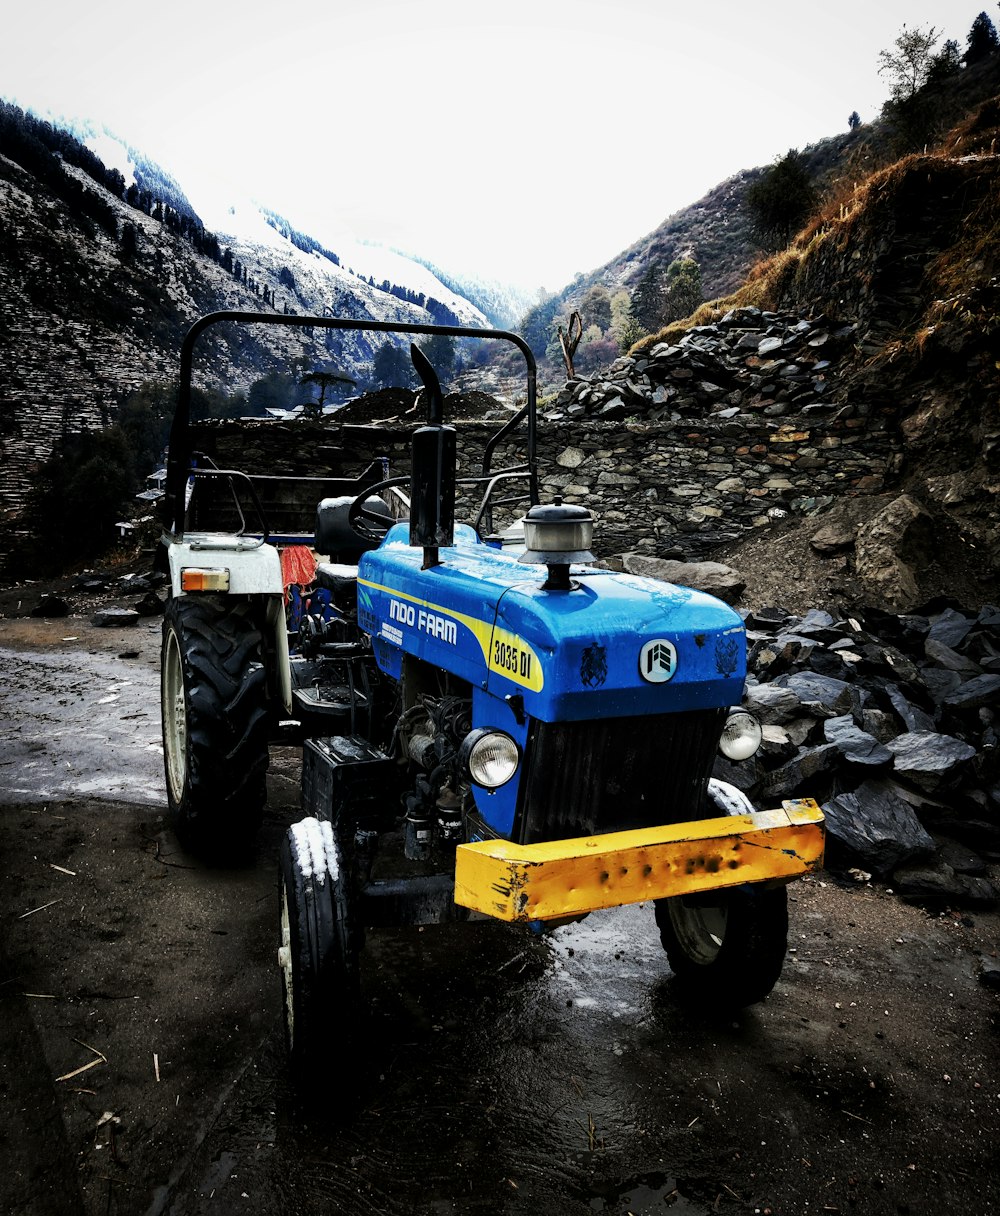 blue and yellow tractor on rocky ground near mountain during daytime